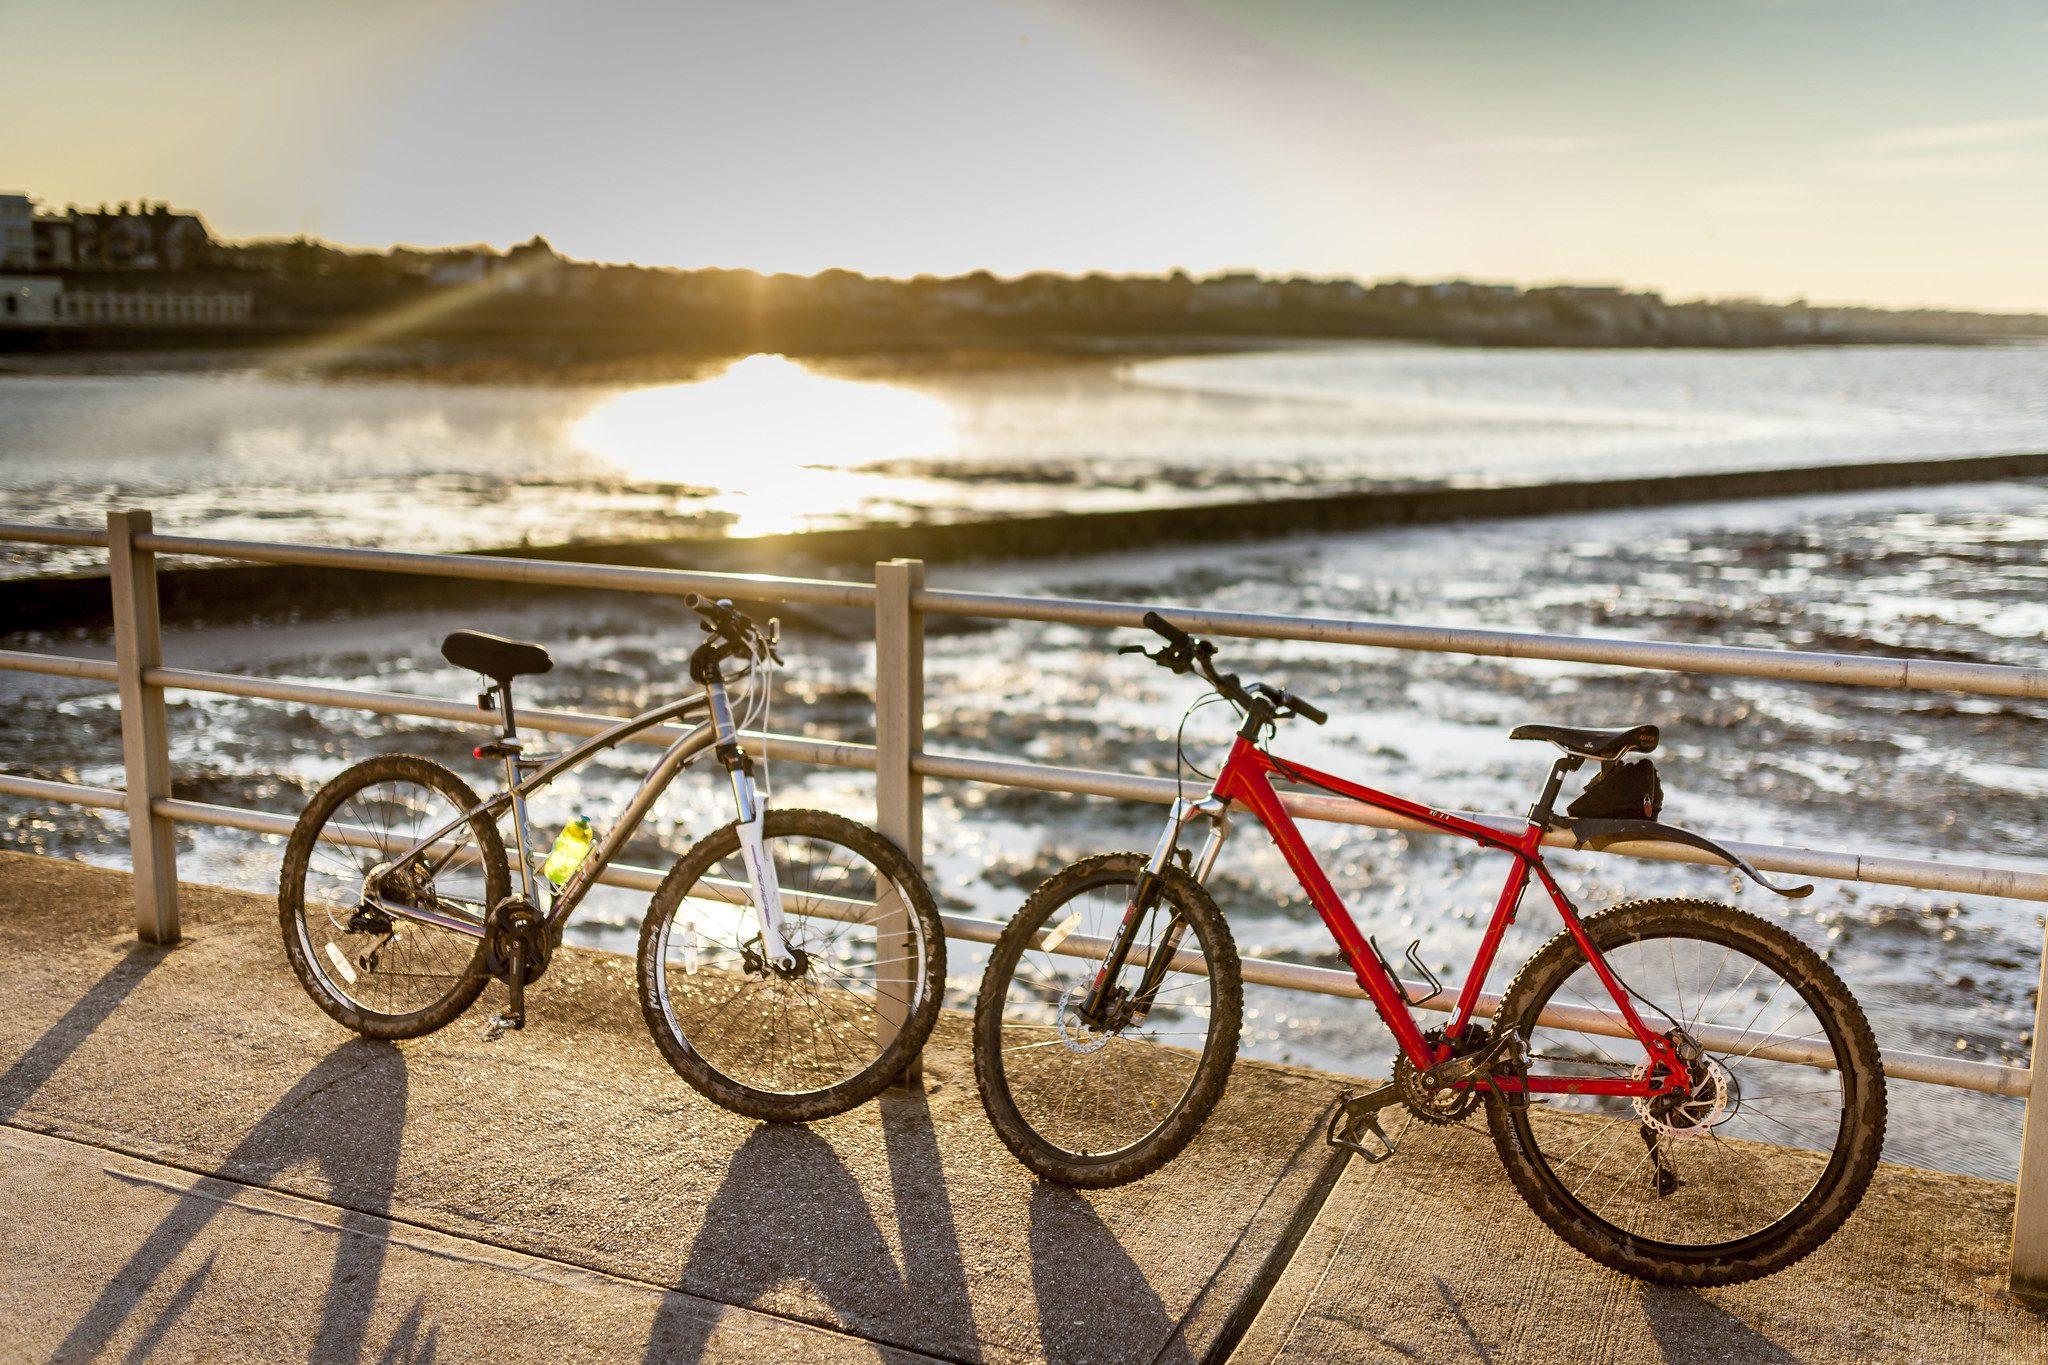 Bikes on the seafront.